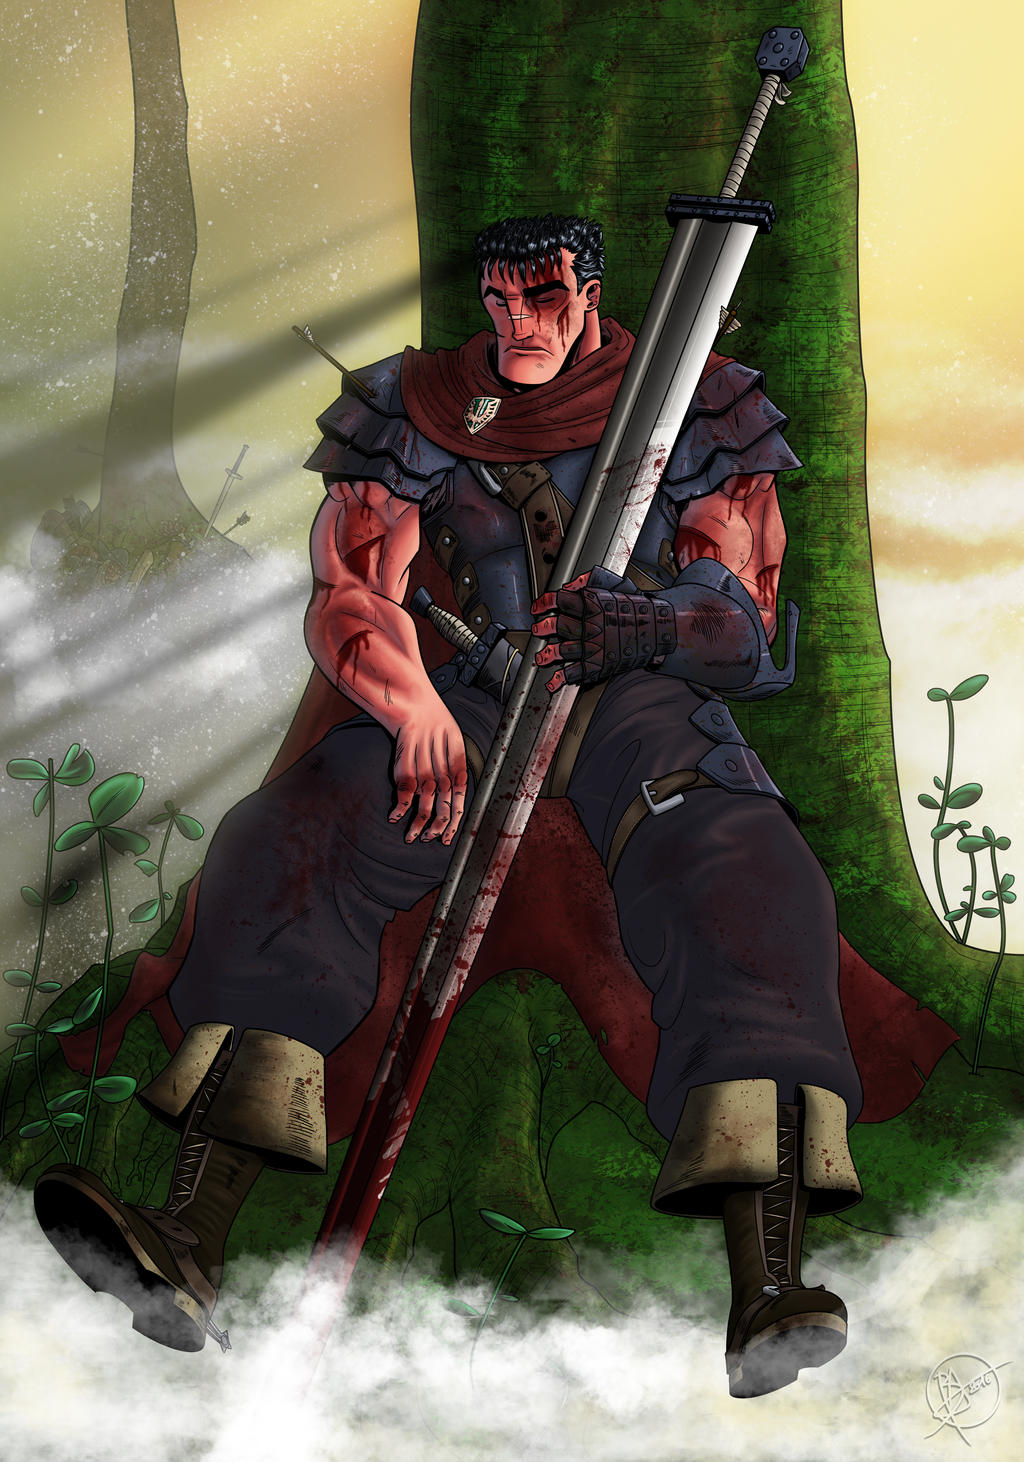 Guts Vs 100 Soldiers By Bloodg On Deviantart